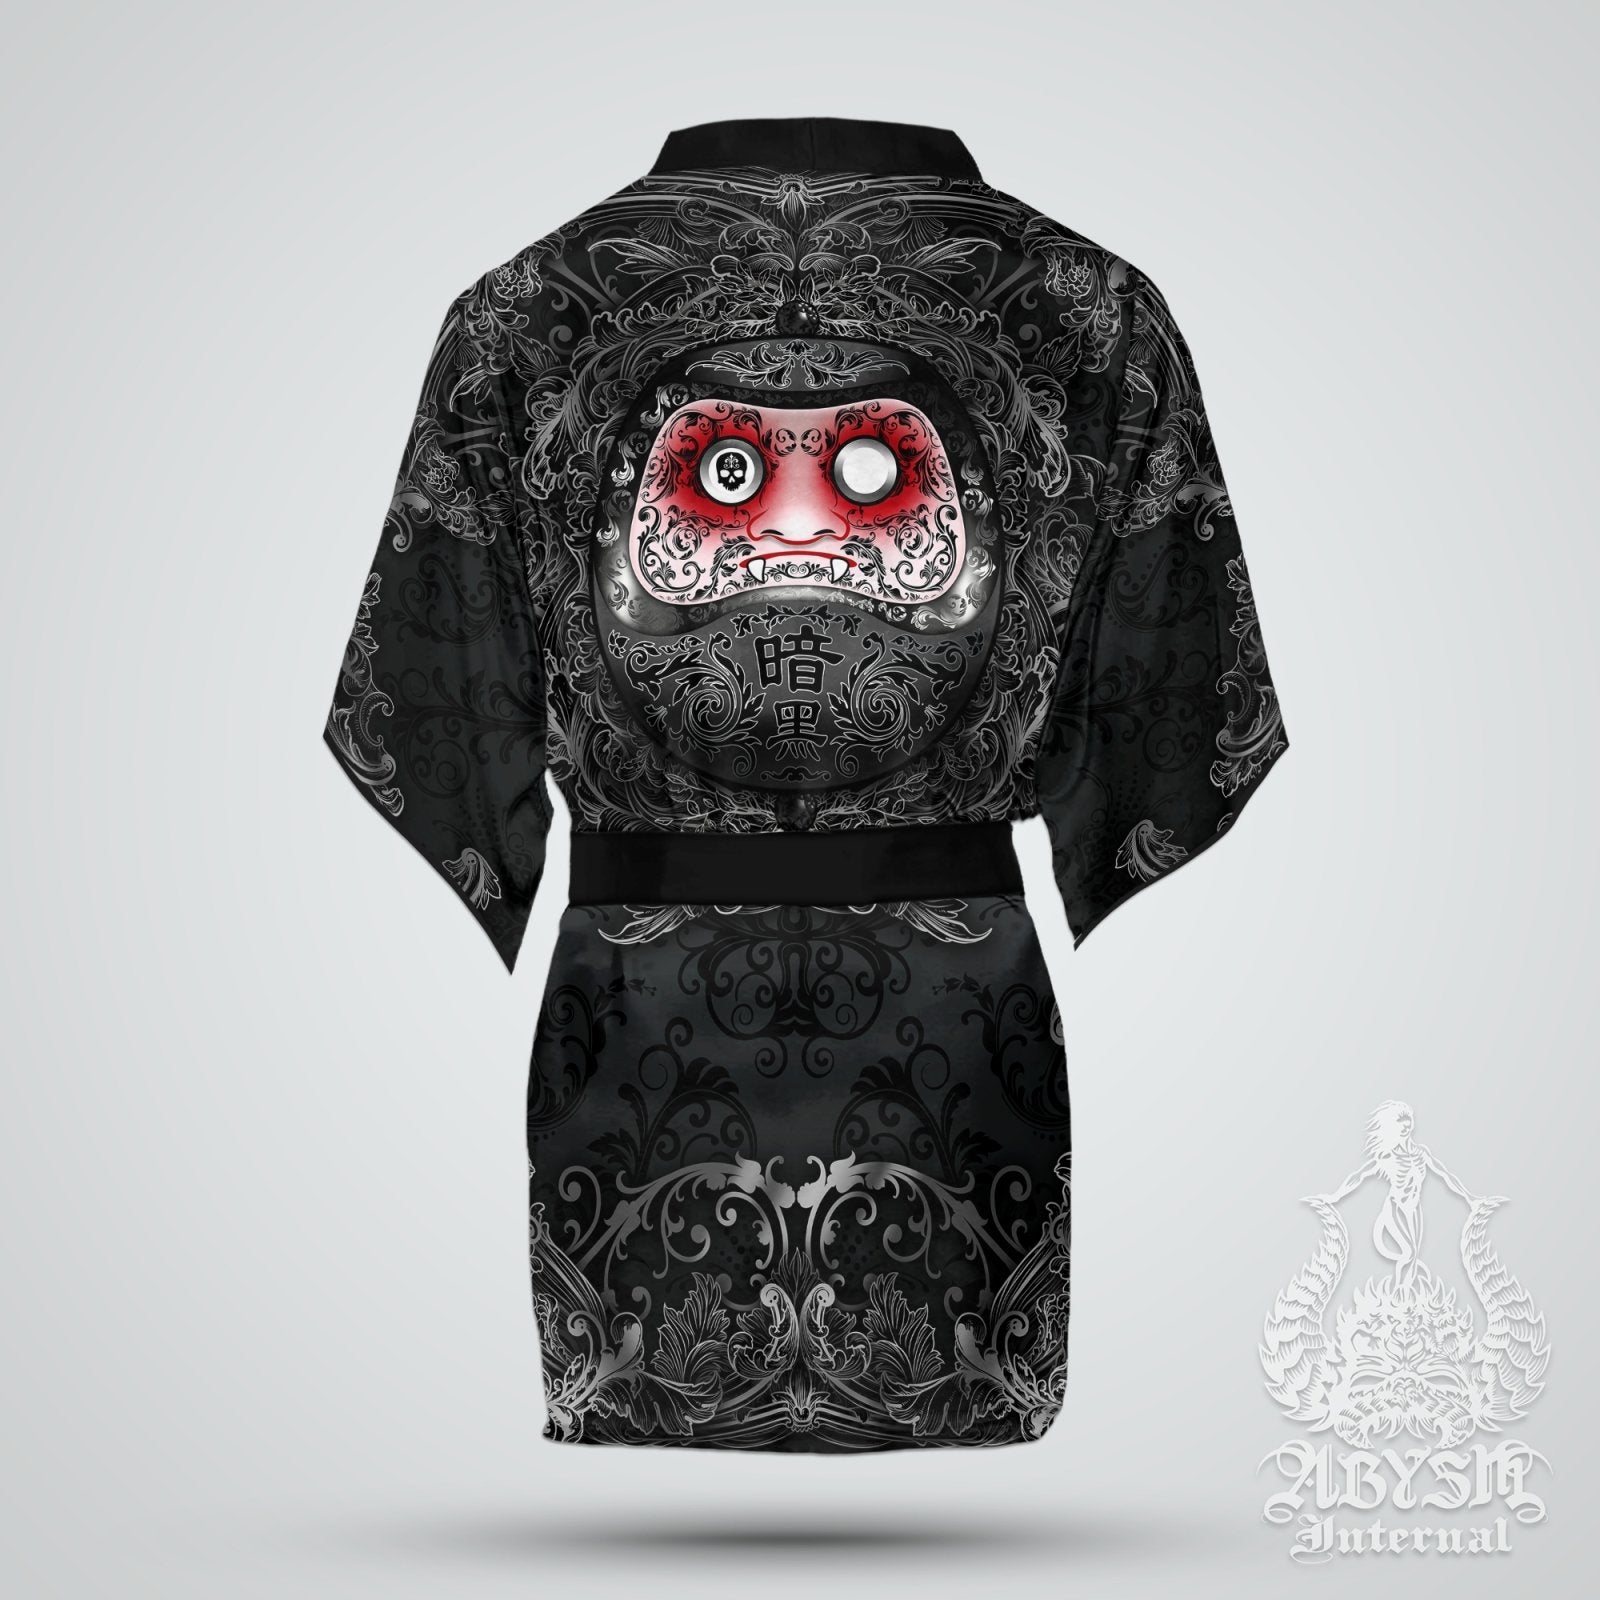 Daruma Cover Up, Beach Outfit, Party Kimono, Japanese Summer Festival Robe, Indie and Alternative Clothing, Unisex - Gothic - Abysm Internal